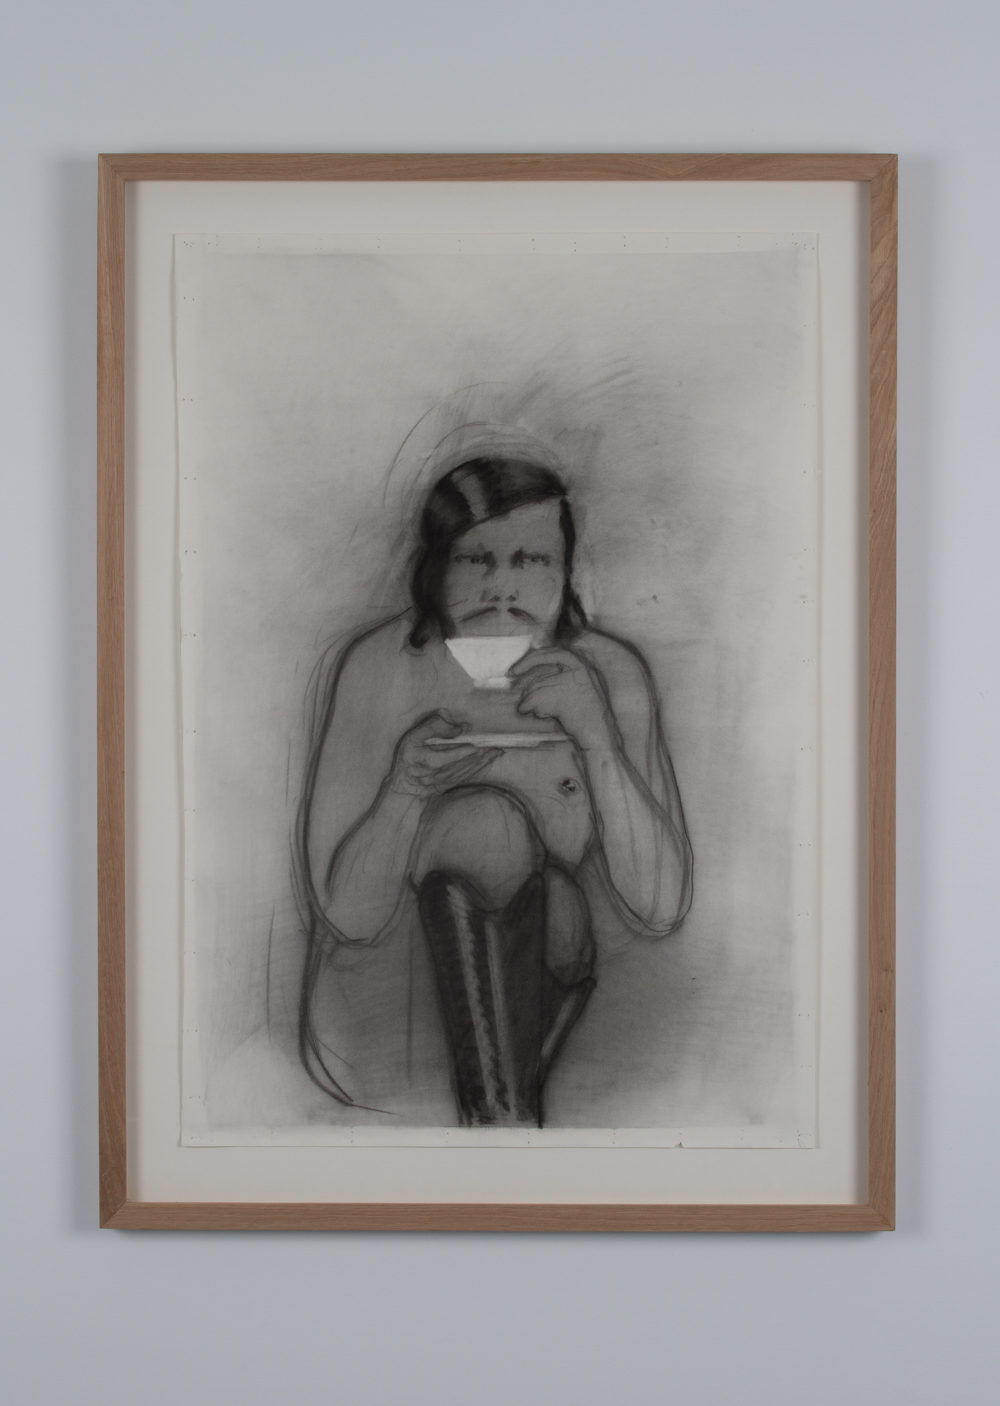 A charcoal drawing of a person sitting shirtless and crosslegged holding a tea cup and saucer in front of their face. They are wearing tall black boots and have a mustache.